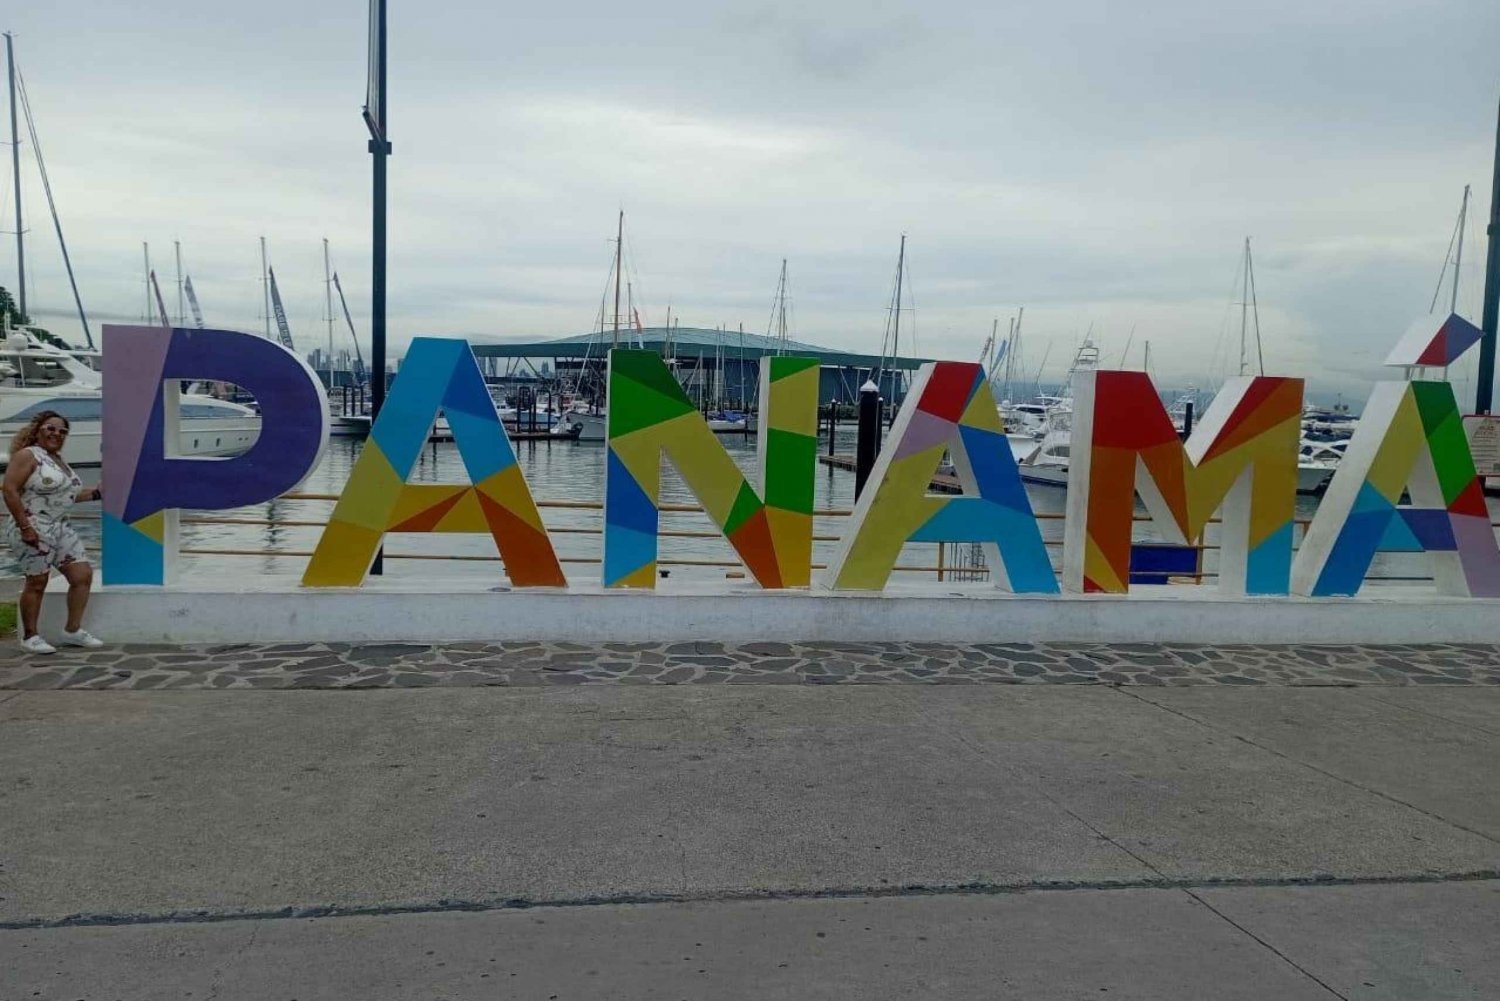 Explore Panama: A Fascinating Tour of the Canal